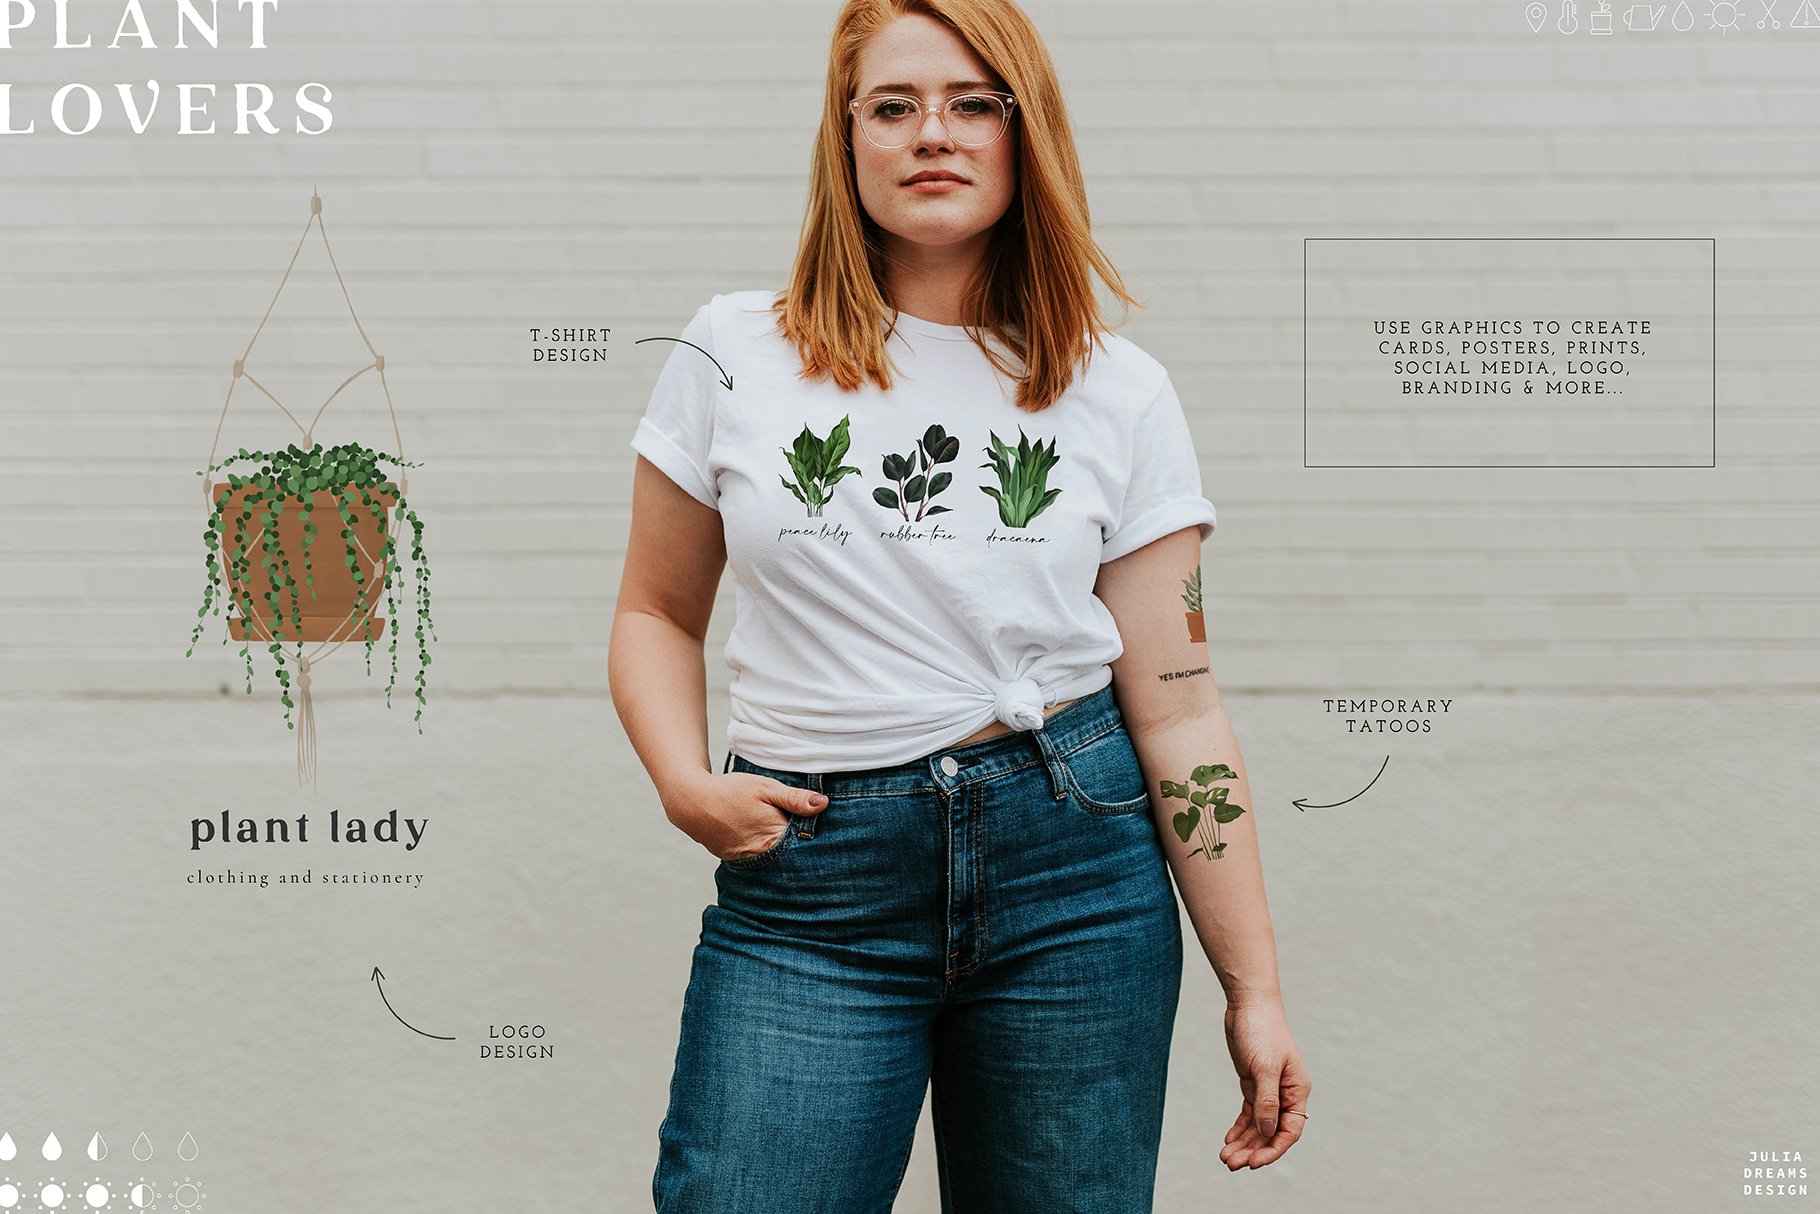 Classic white t-shirt with some plants.